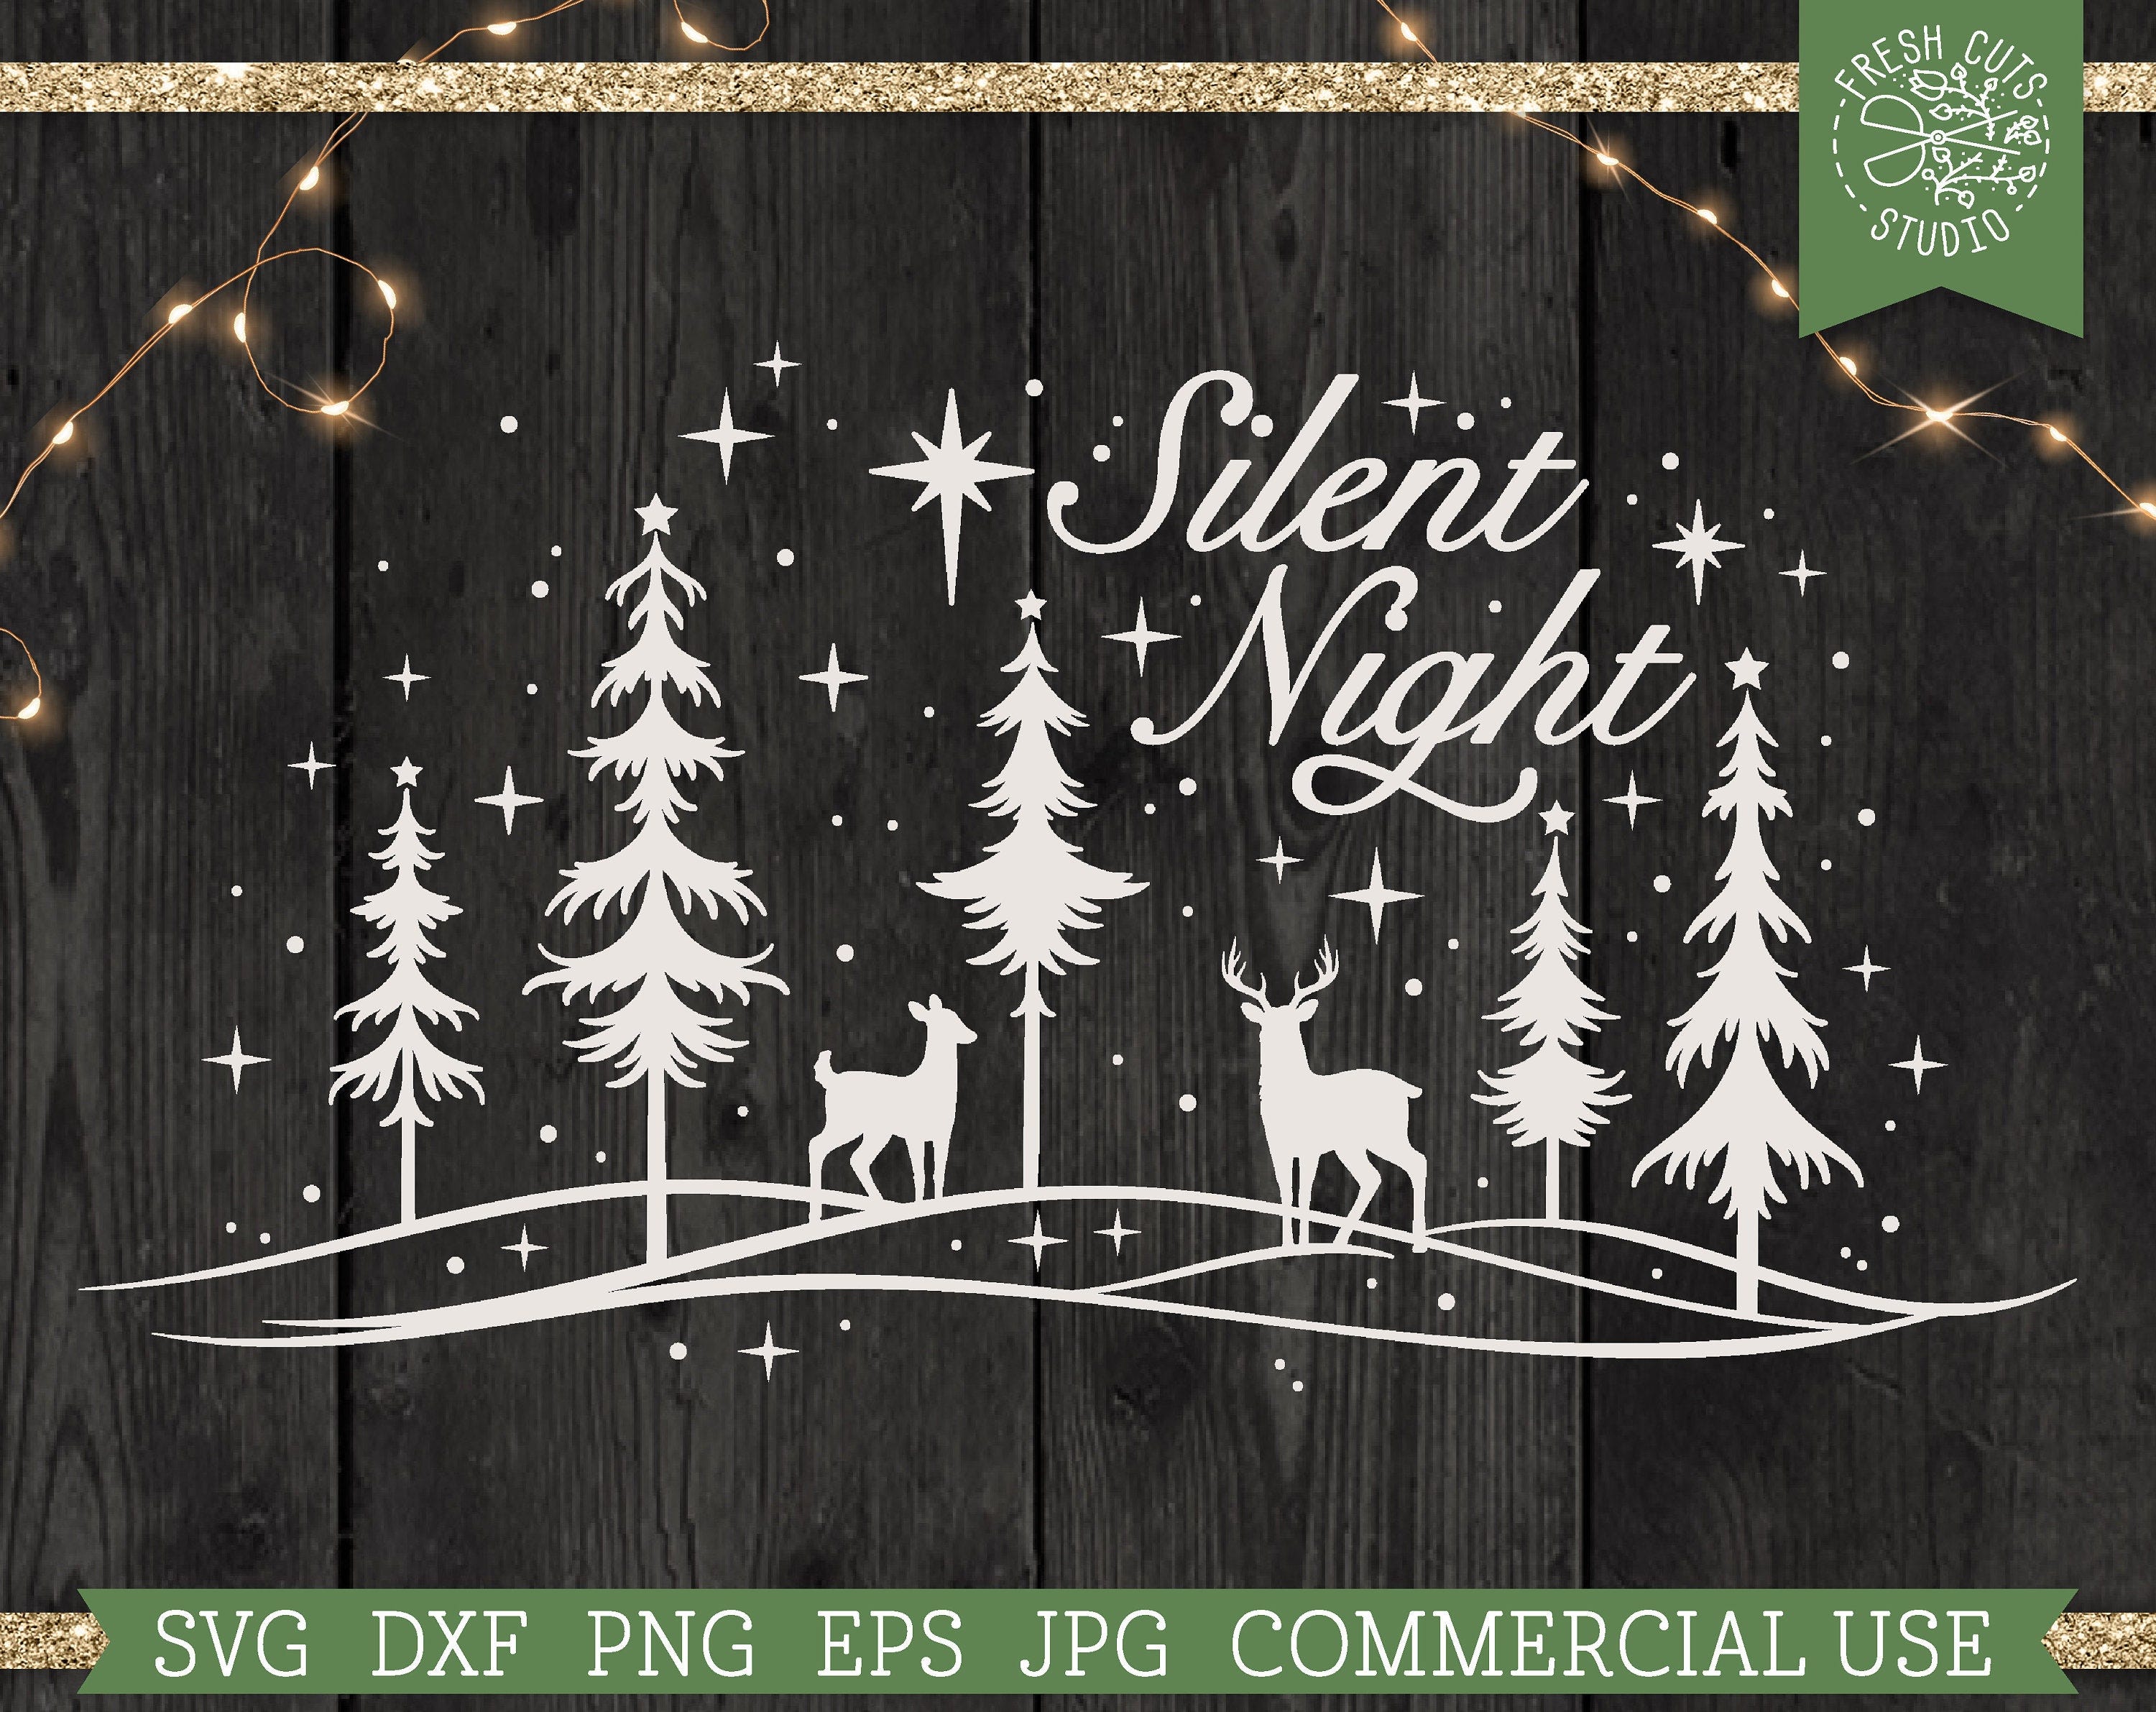 Christmas Deer Silent Night SVG Cut File for Cricut, Snowy Forest Woods Silhouette File, Snowing Pine Trees, Doe and Buck, Commercial Use